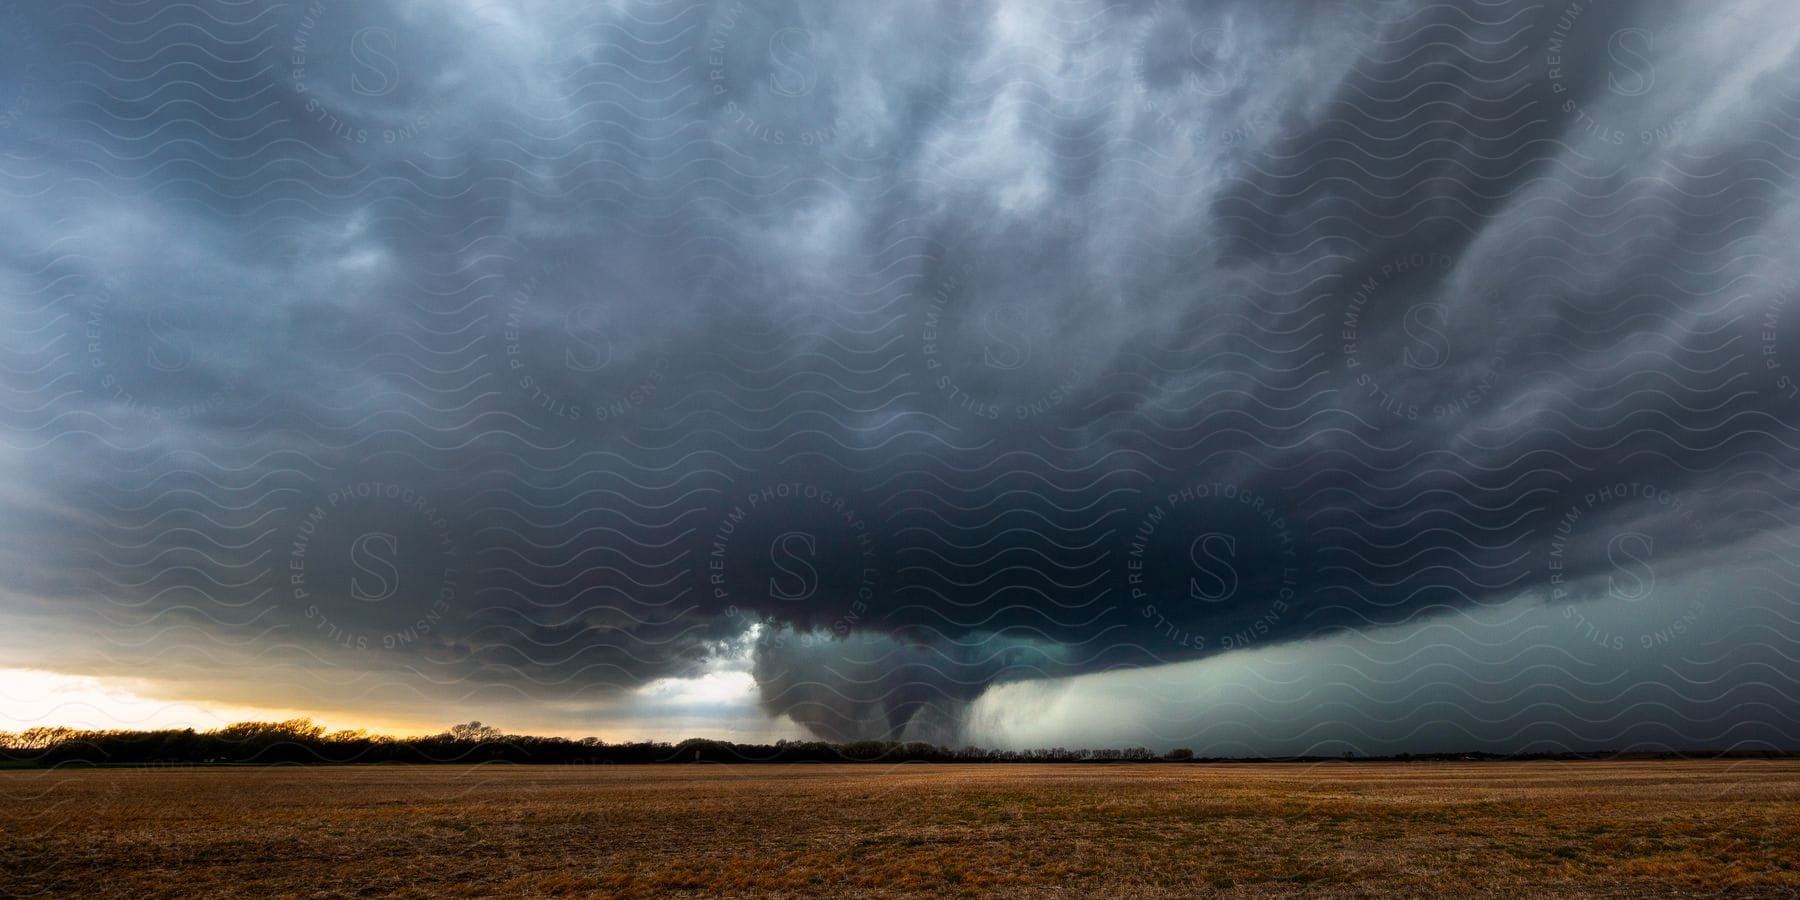 Dark storm clouds above a plain with a tornado forming at the center